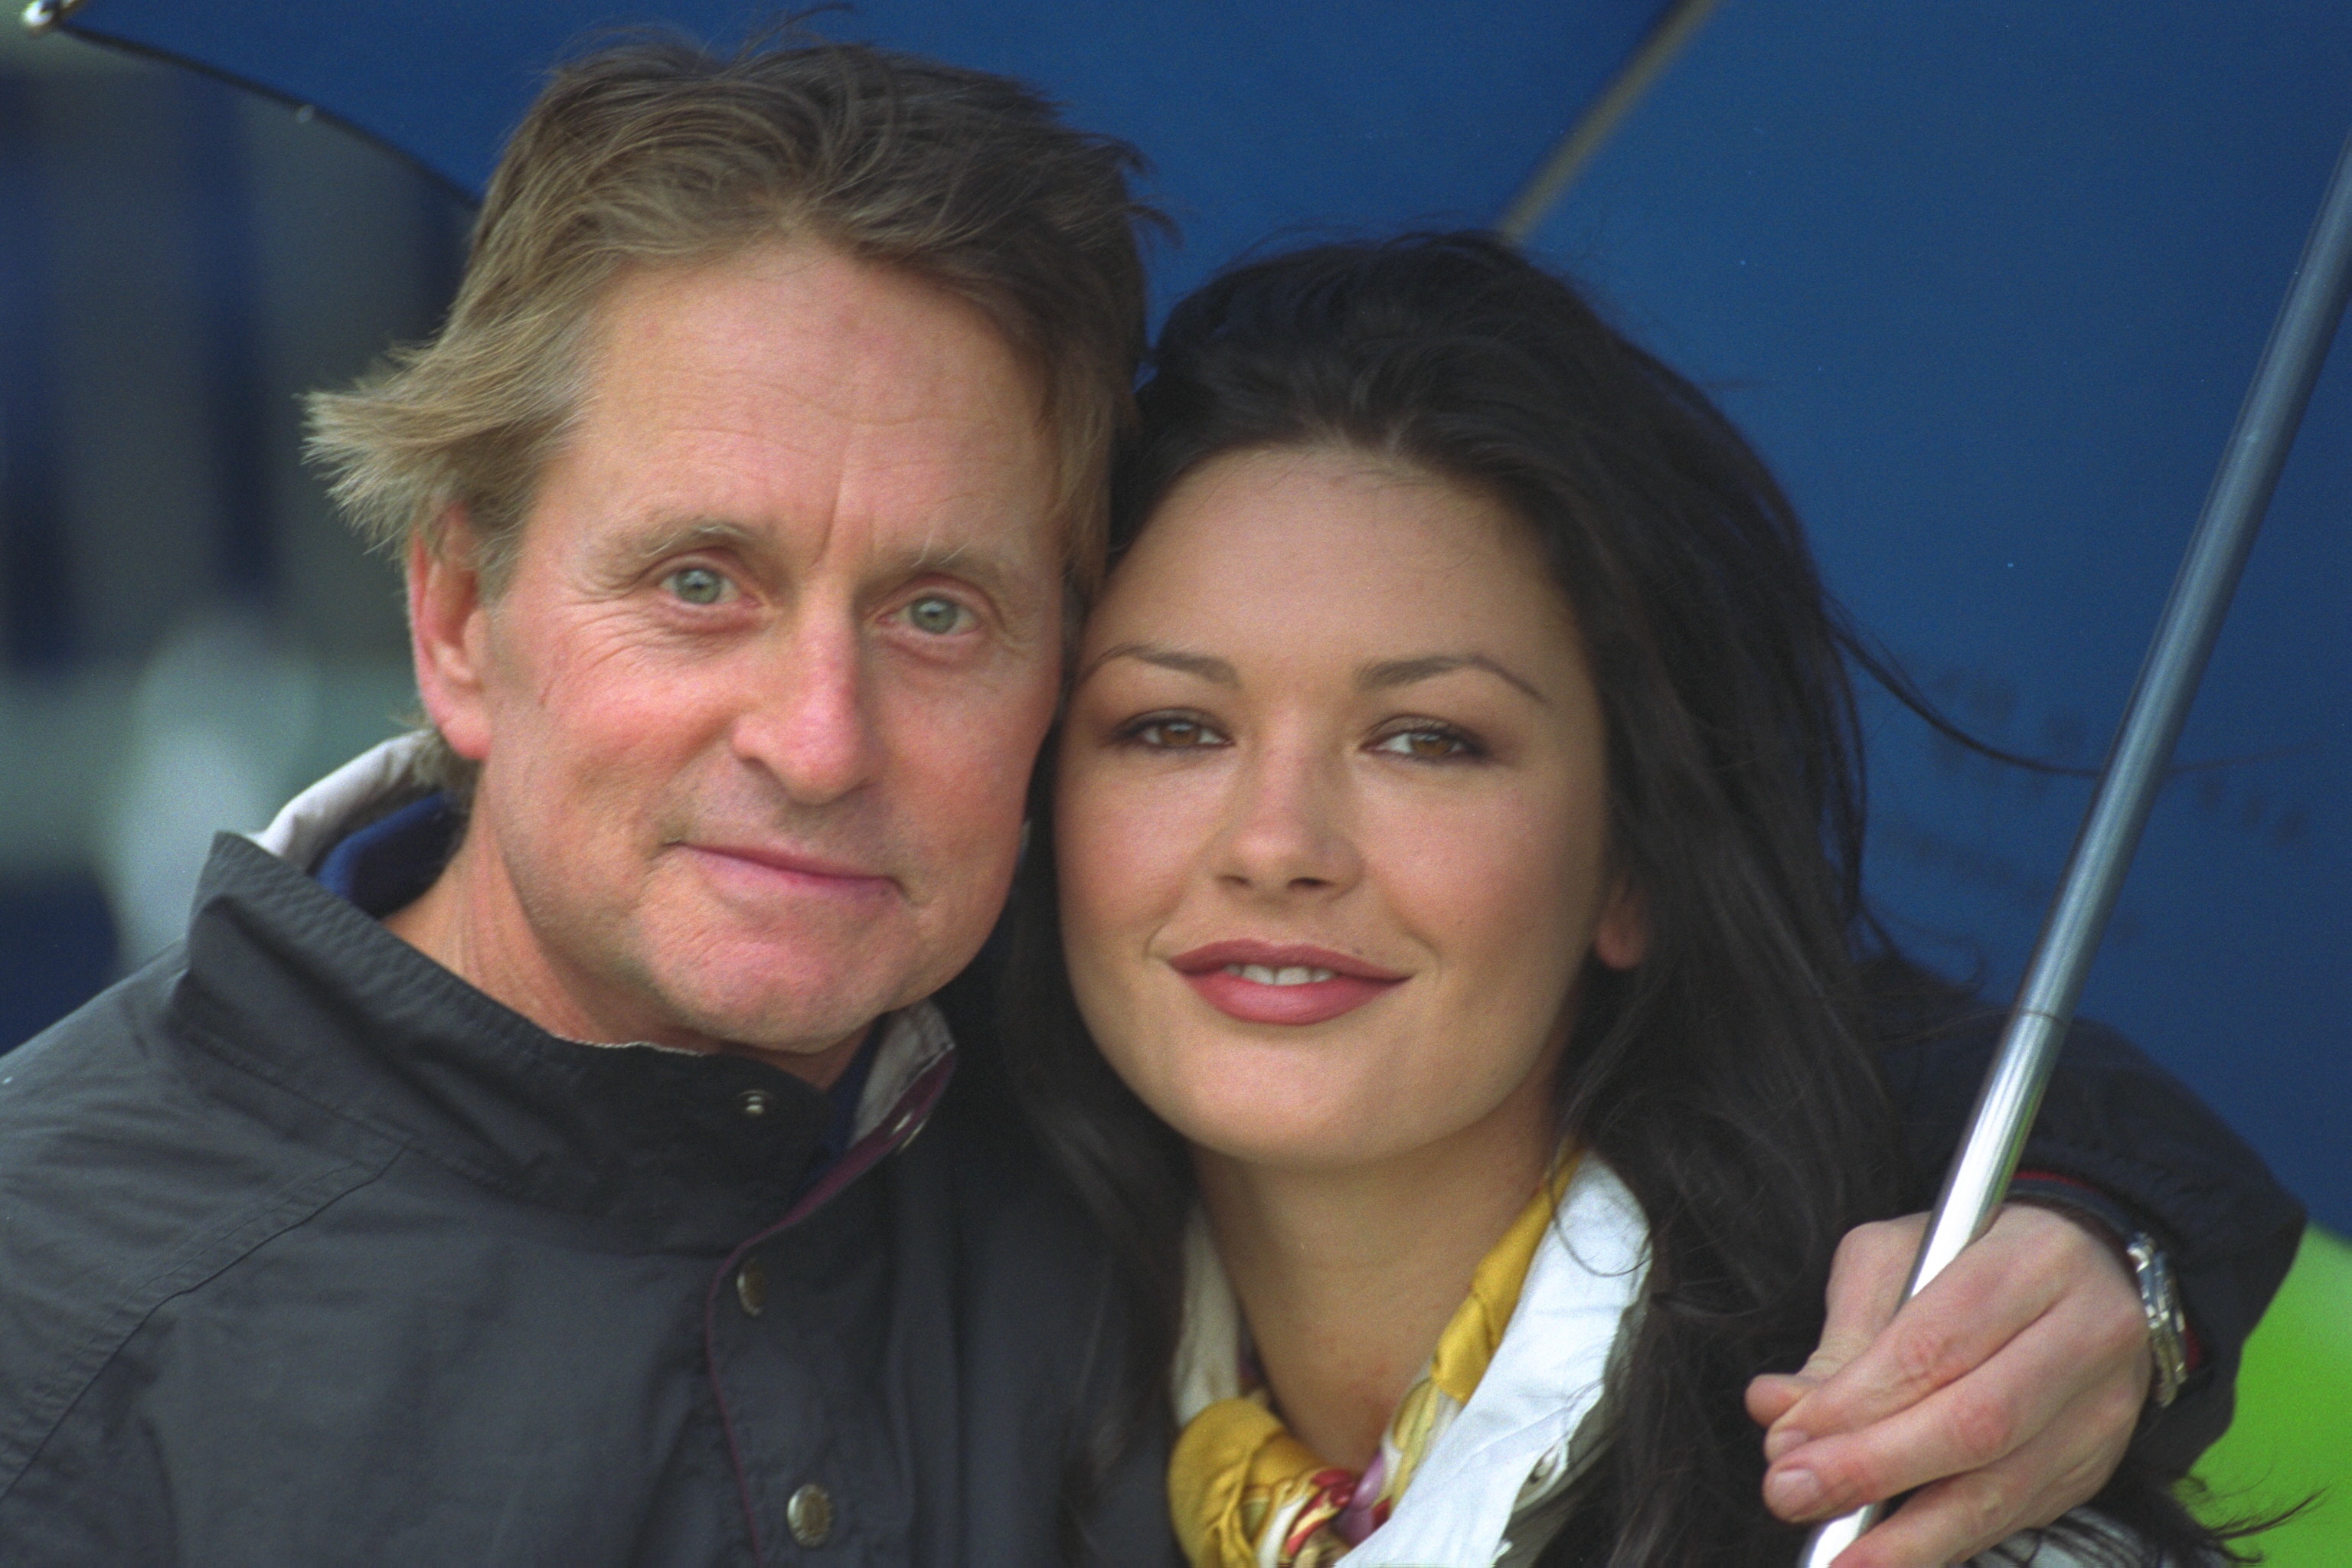 Michael Douglas and Catherine Zeta-Jones while playing golf at St. Andrews. | Source: Getty Images